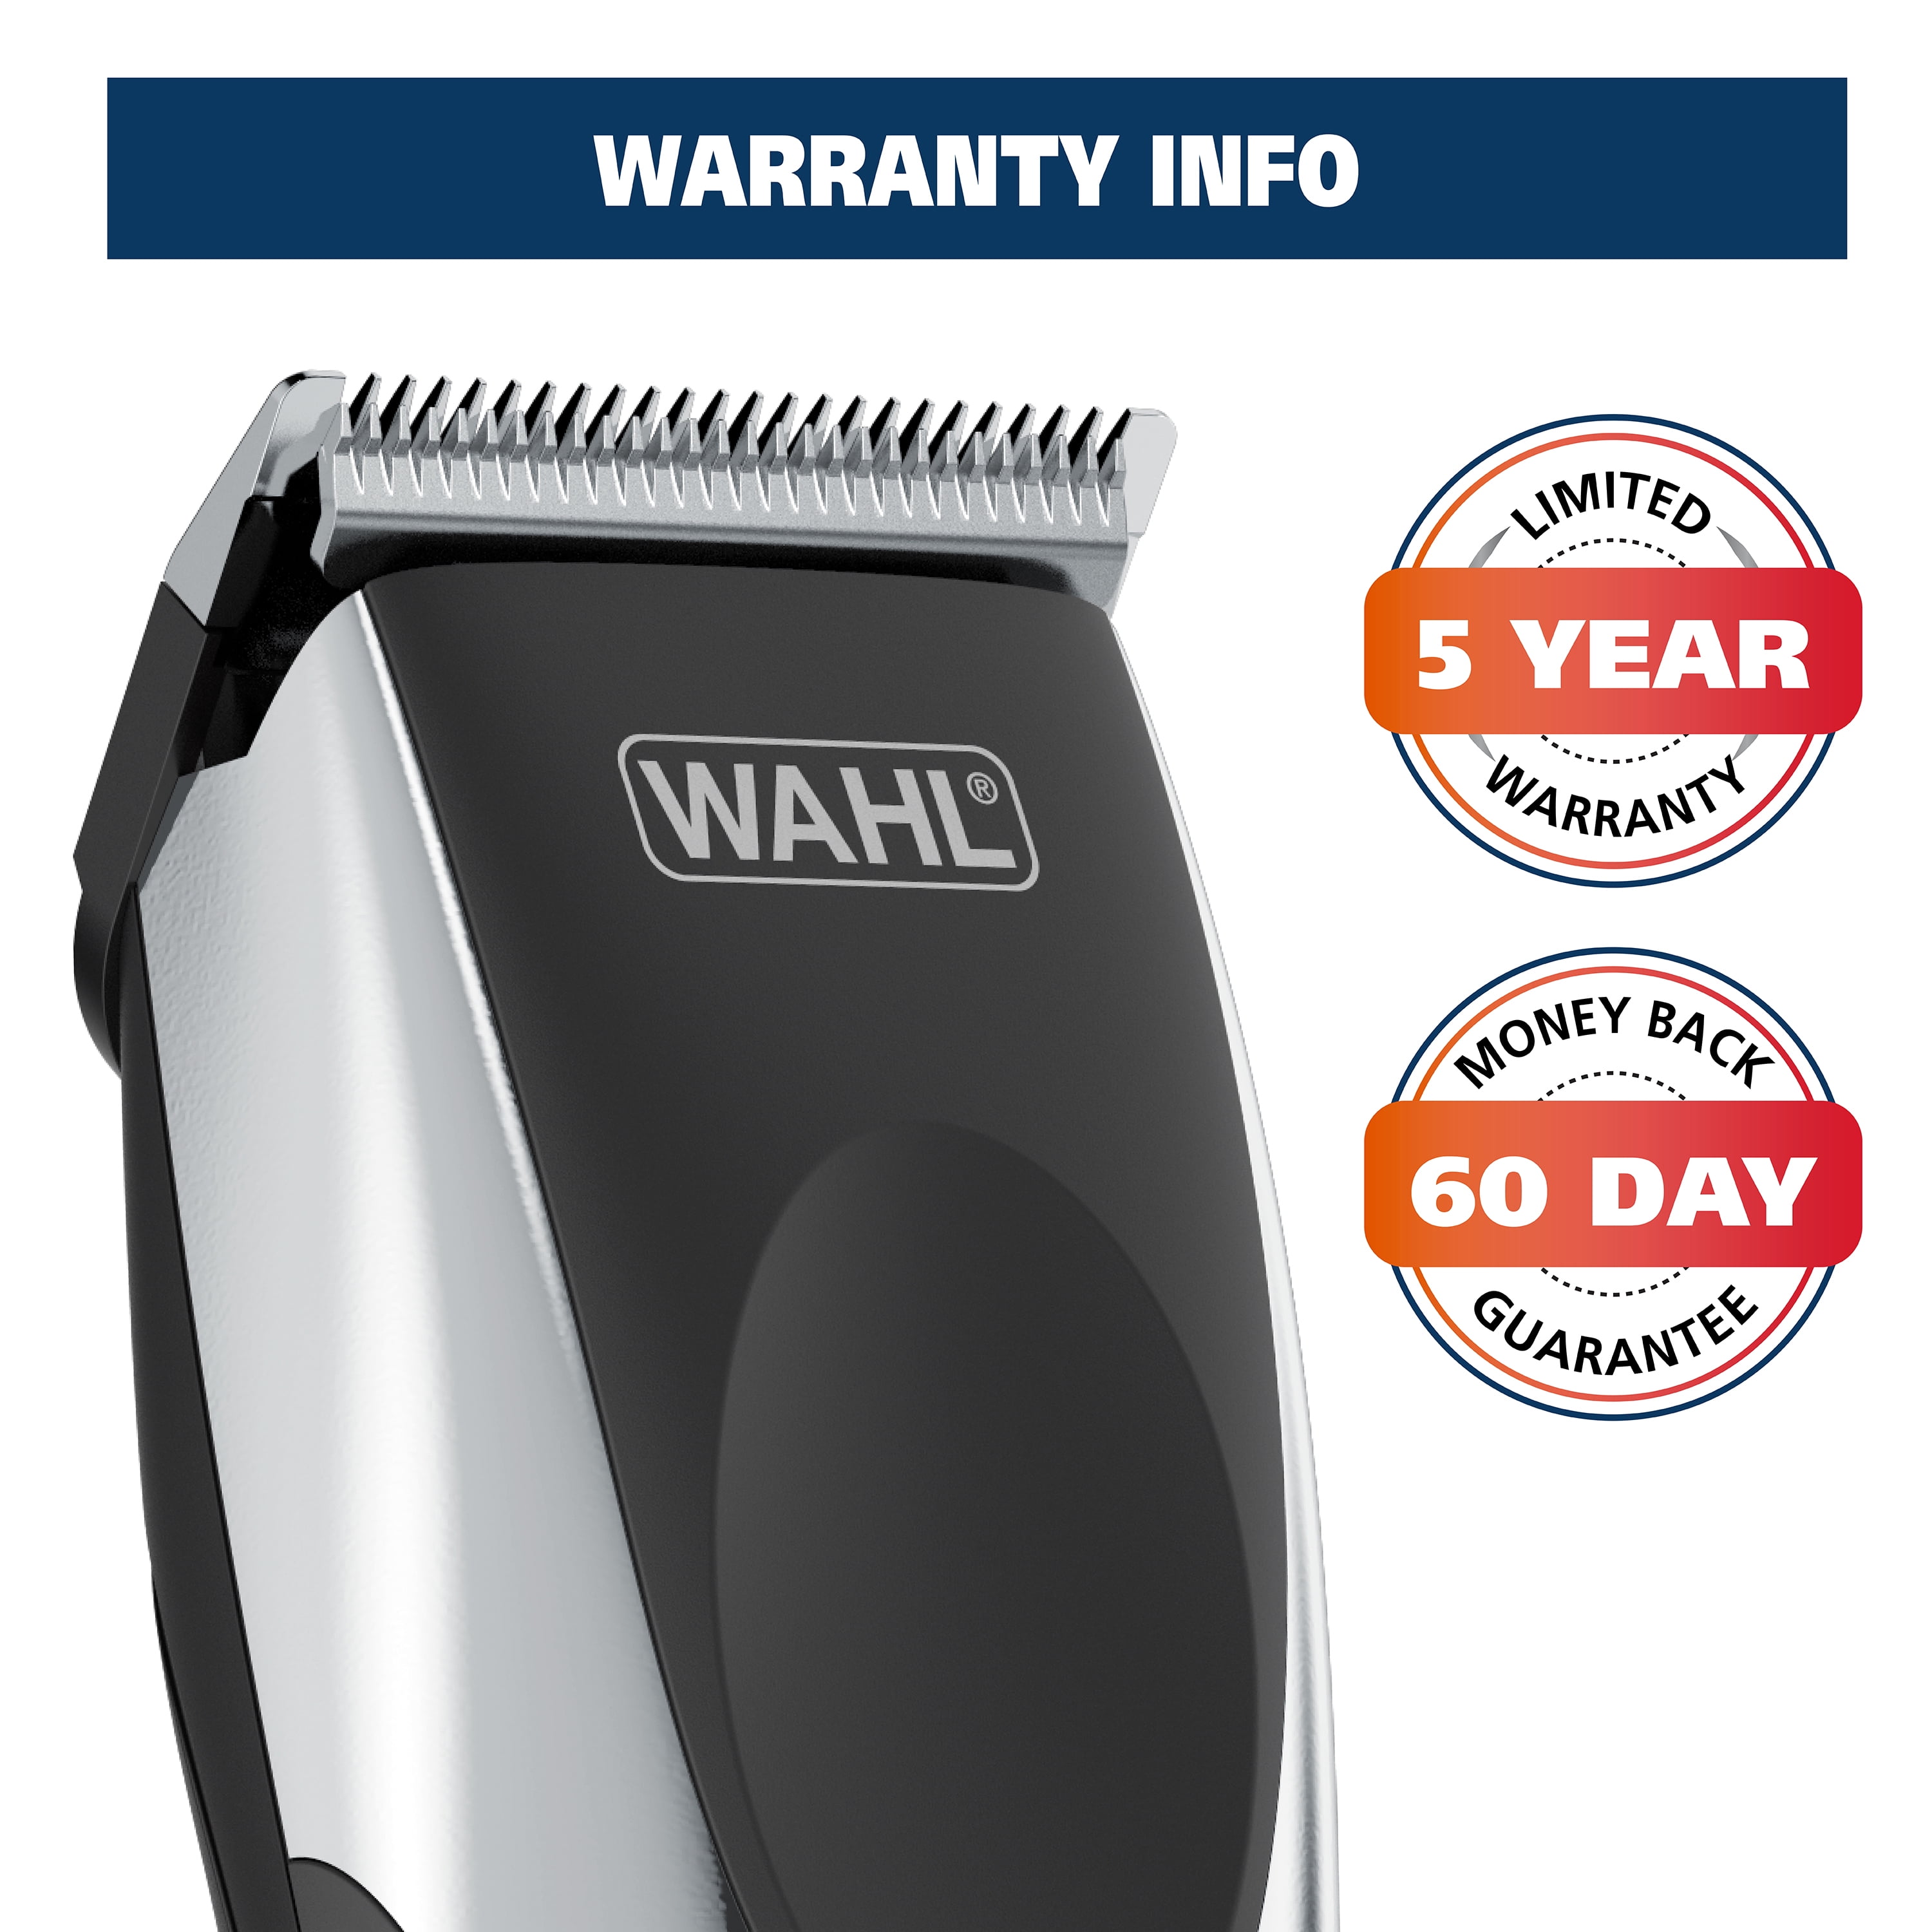 / - & Cordless Worldwide Haircut Cord Clipper with 9639-700 Transformer Voltage - Wahl Model Beard